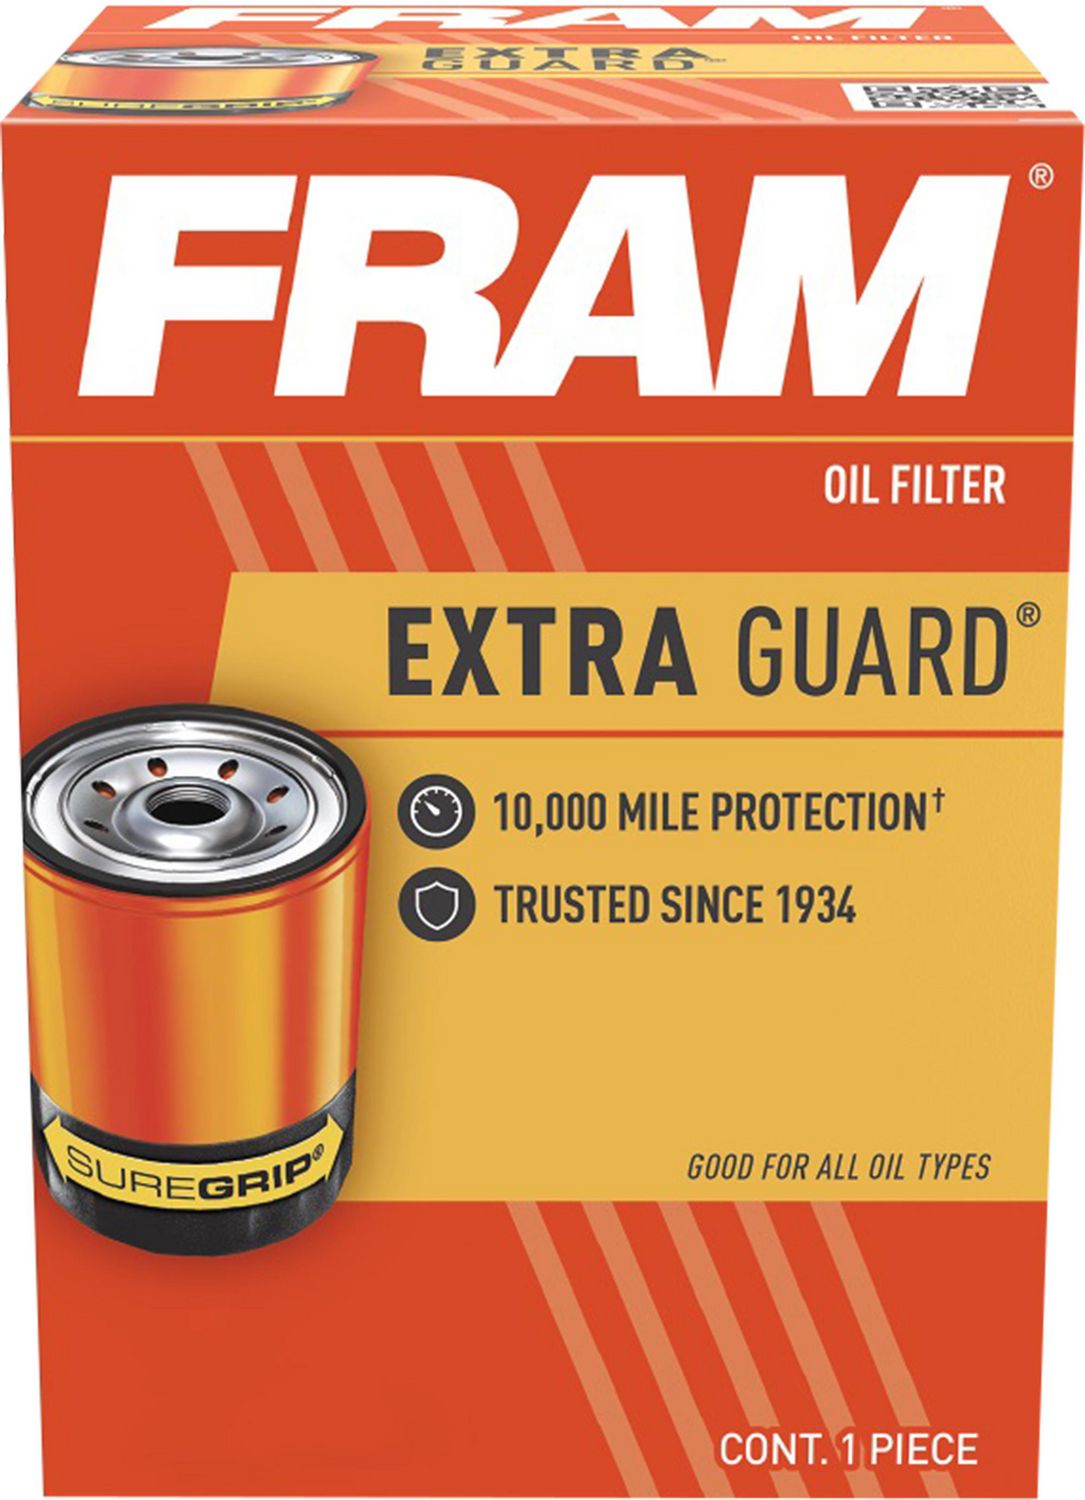 FRAM PH9688 Extra Guard Oil Filter, Proven protection for up to